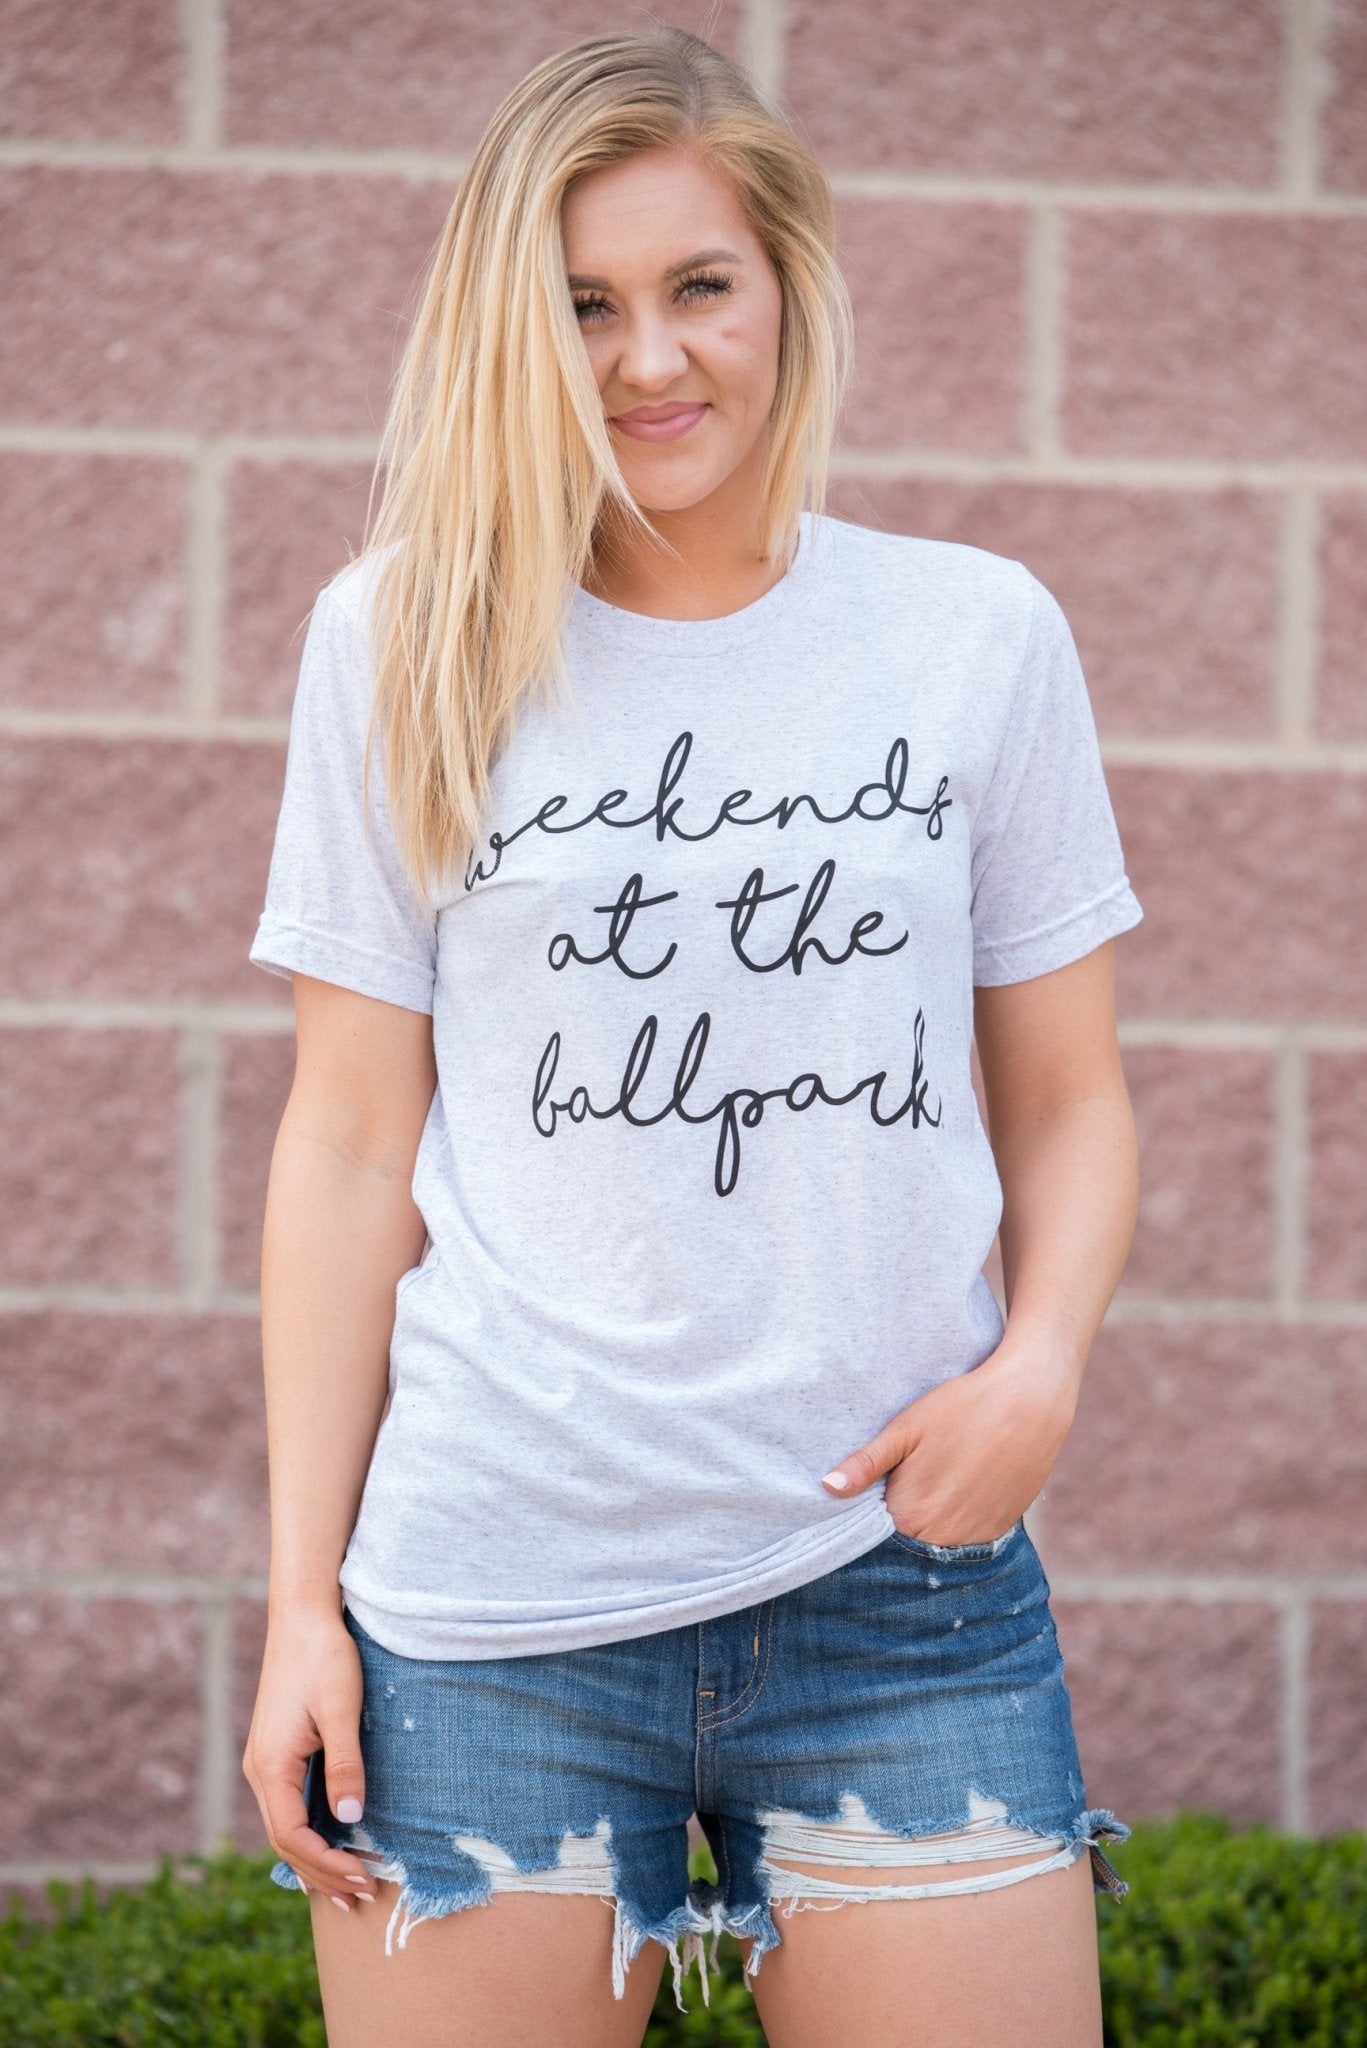 Weekends at the ball park unisex short sleeve t-shirt white fleck - Cute T-shirts - Funny T-Shirts at Lush Fashion Lounge Boutique in Oklahoma City